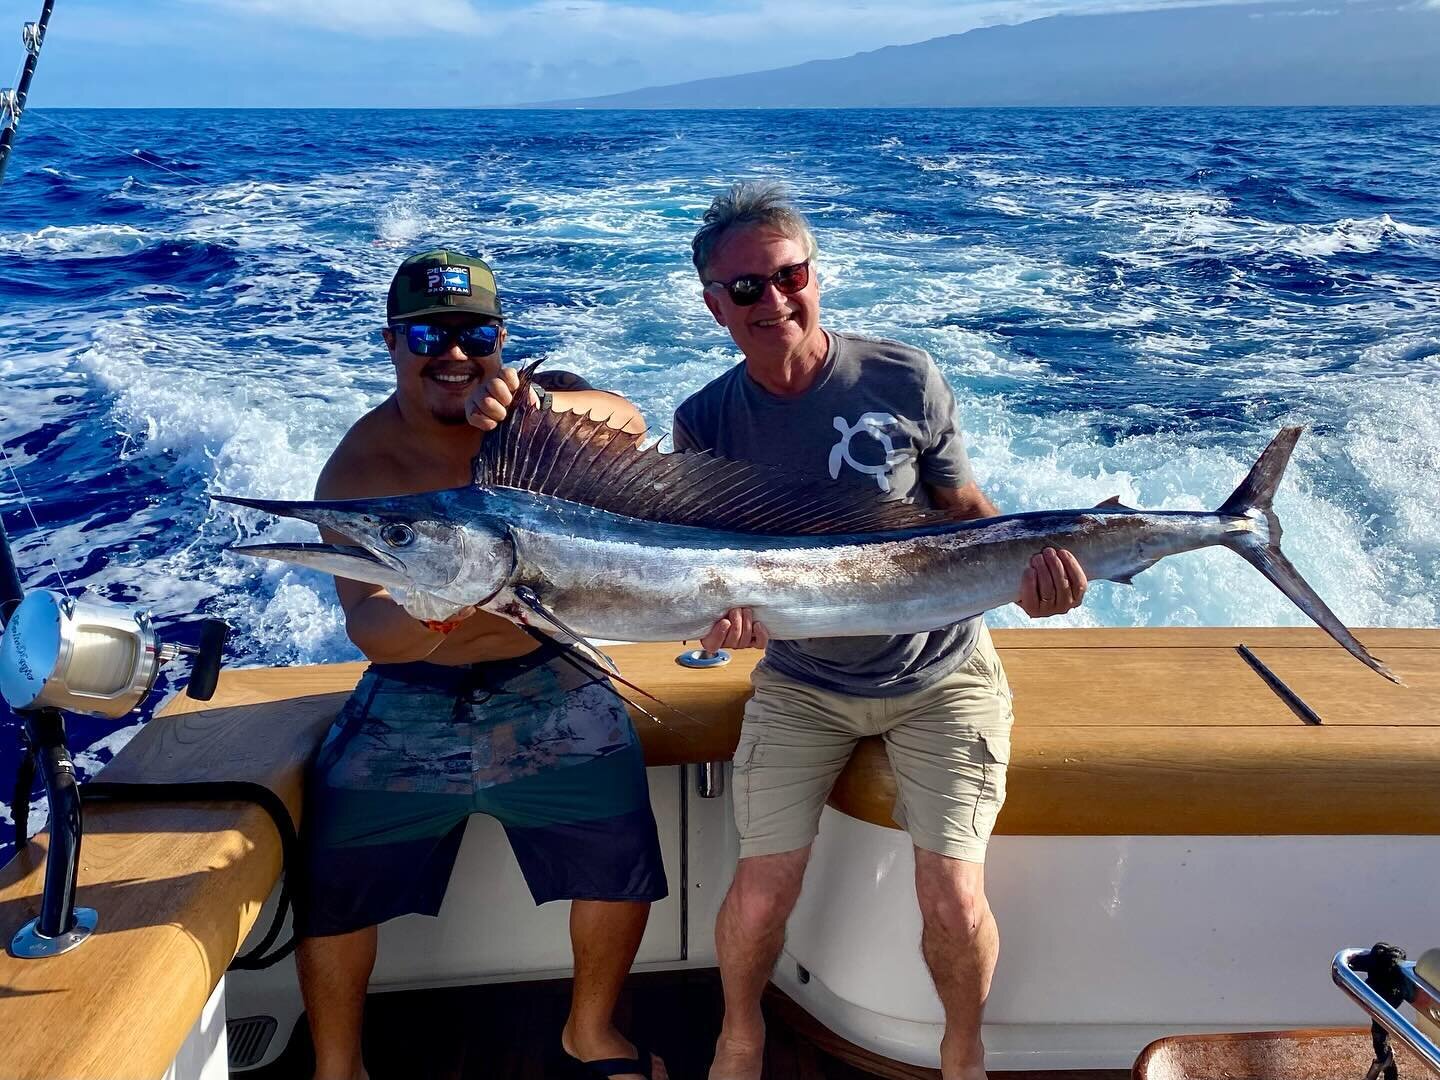 First spearfish for both Westin and Fred today, and plenty of food to go around! Congrats guys! Marlin Magic Tear Drop AP lure and Fudo Southern Tuna hook.
.
.
📸 @fishergal808 
.
.
#marlinmagic #marlinmagiclures #fudo #fudofishing #fudohooks #southe